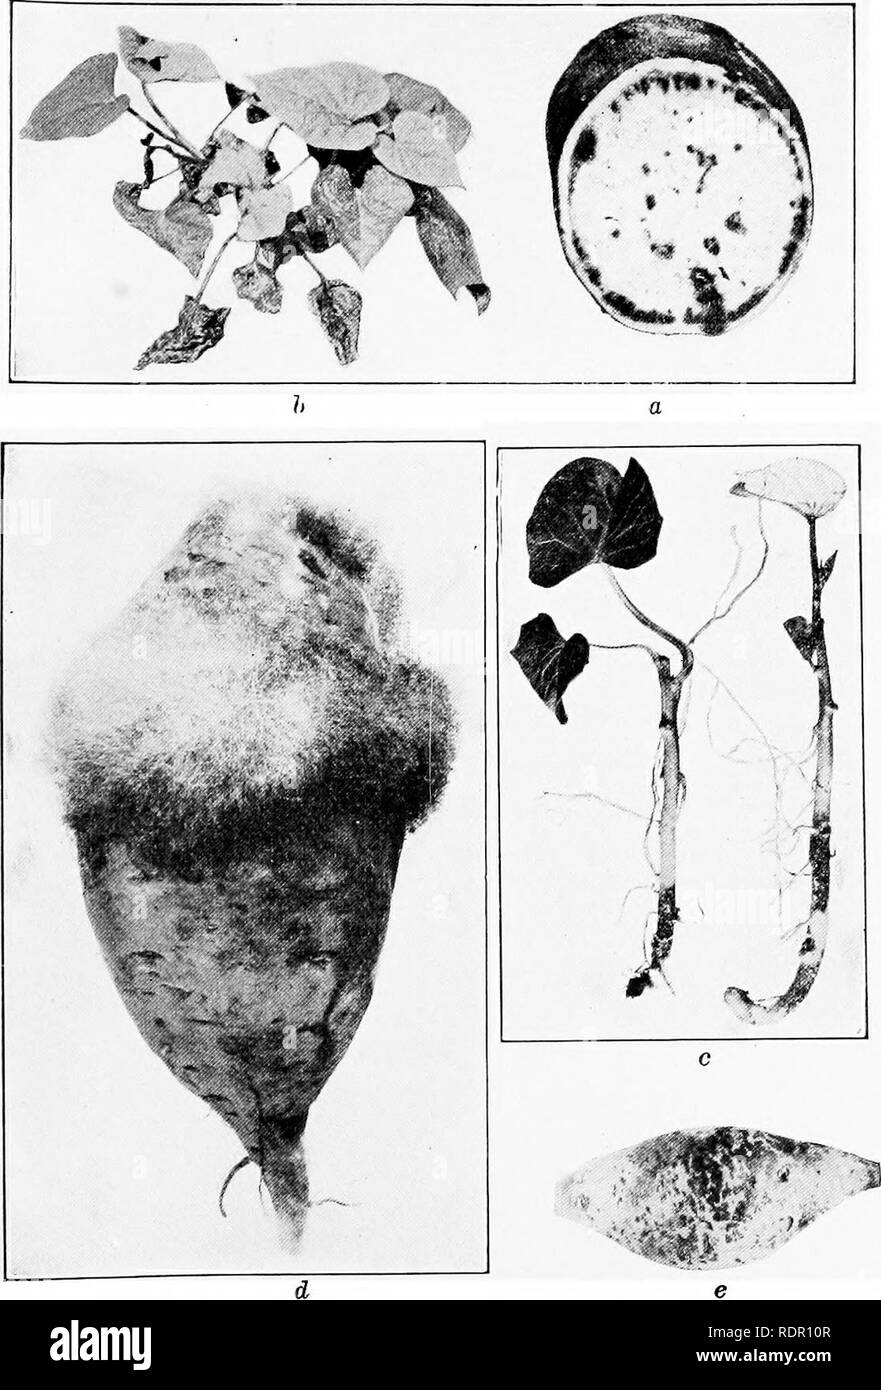 . The sweet potato; a handbook for the practical grower. Sweet potatoes. Plate V.— Diseases of sweet potatoes, a, A section through a sweet potato sliovving the blackened ring just below the surface caused by the stem-rot fungus, b, A sweet potato plant showing the characteristic symptoms of stem-rot. c, Sweet potato black-rot. Small sweet potato plant showing the characteristic blackening of the underground part of the stem, d. Soft-rot. A sweet potato showing the moldy growth of the fungus causing soft-rot. e. Soil-splotch.. Please note that these images are extracted from scanned page image Stock Photo